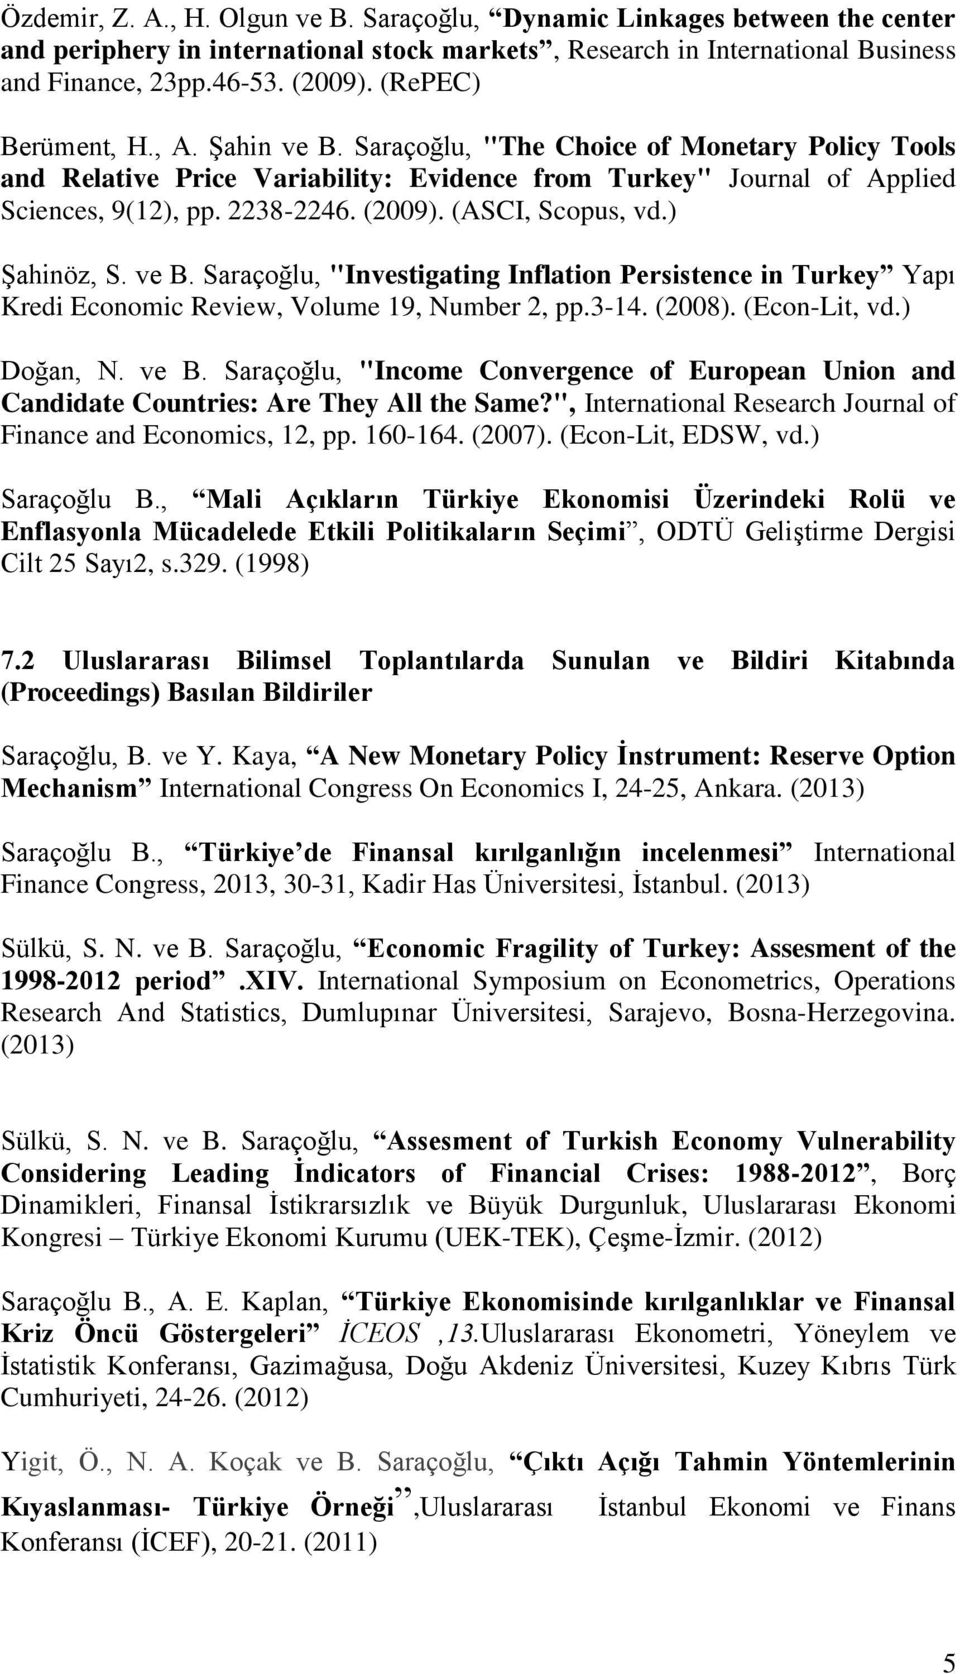 (ASCI, Scopus, vd.) Şahinöz, S. ve B. Saraçoğlu, "Investigating Inflation Persistence in Turkey Yapı Kredi Economic Review, Volume 19, Number 2, pp.3-14. (2008). (Econ-Lit, vd.) Doğan, N. ve B. Saraçoğlu, "Income Convergence of European Union and Candidate Countries: Are They All the Same?